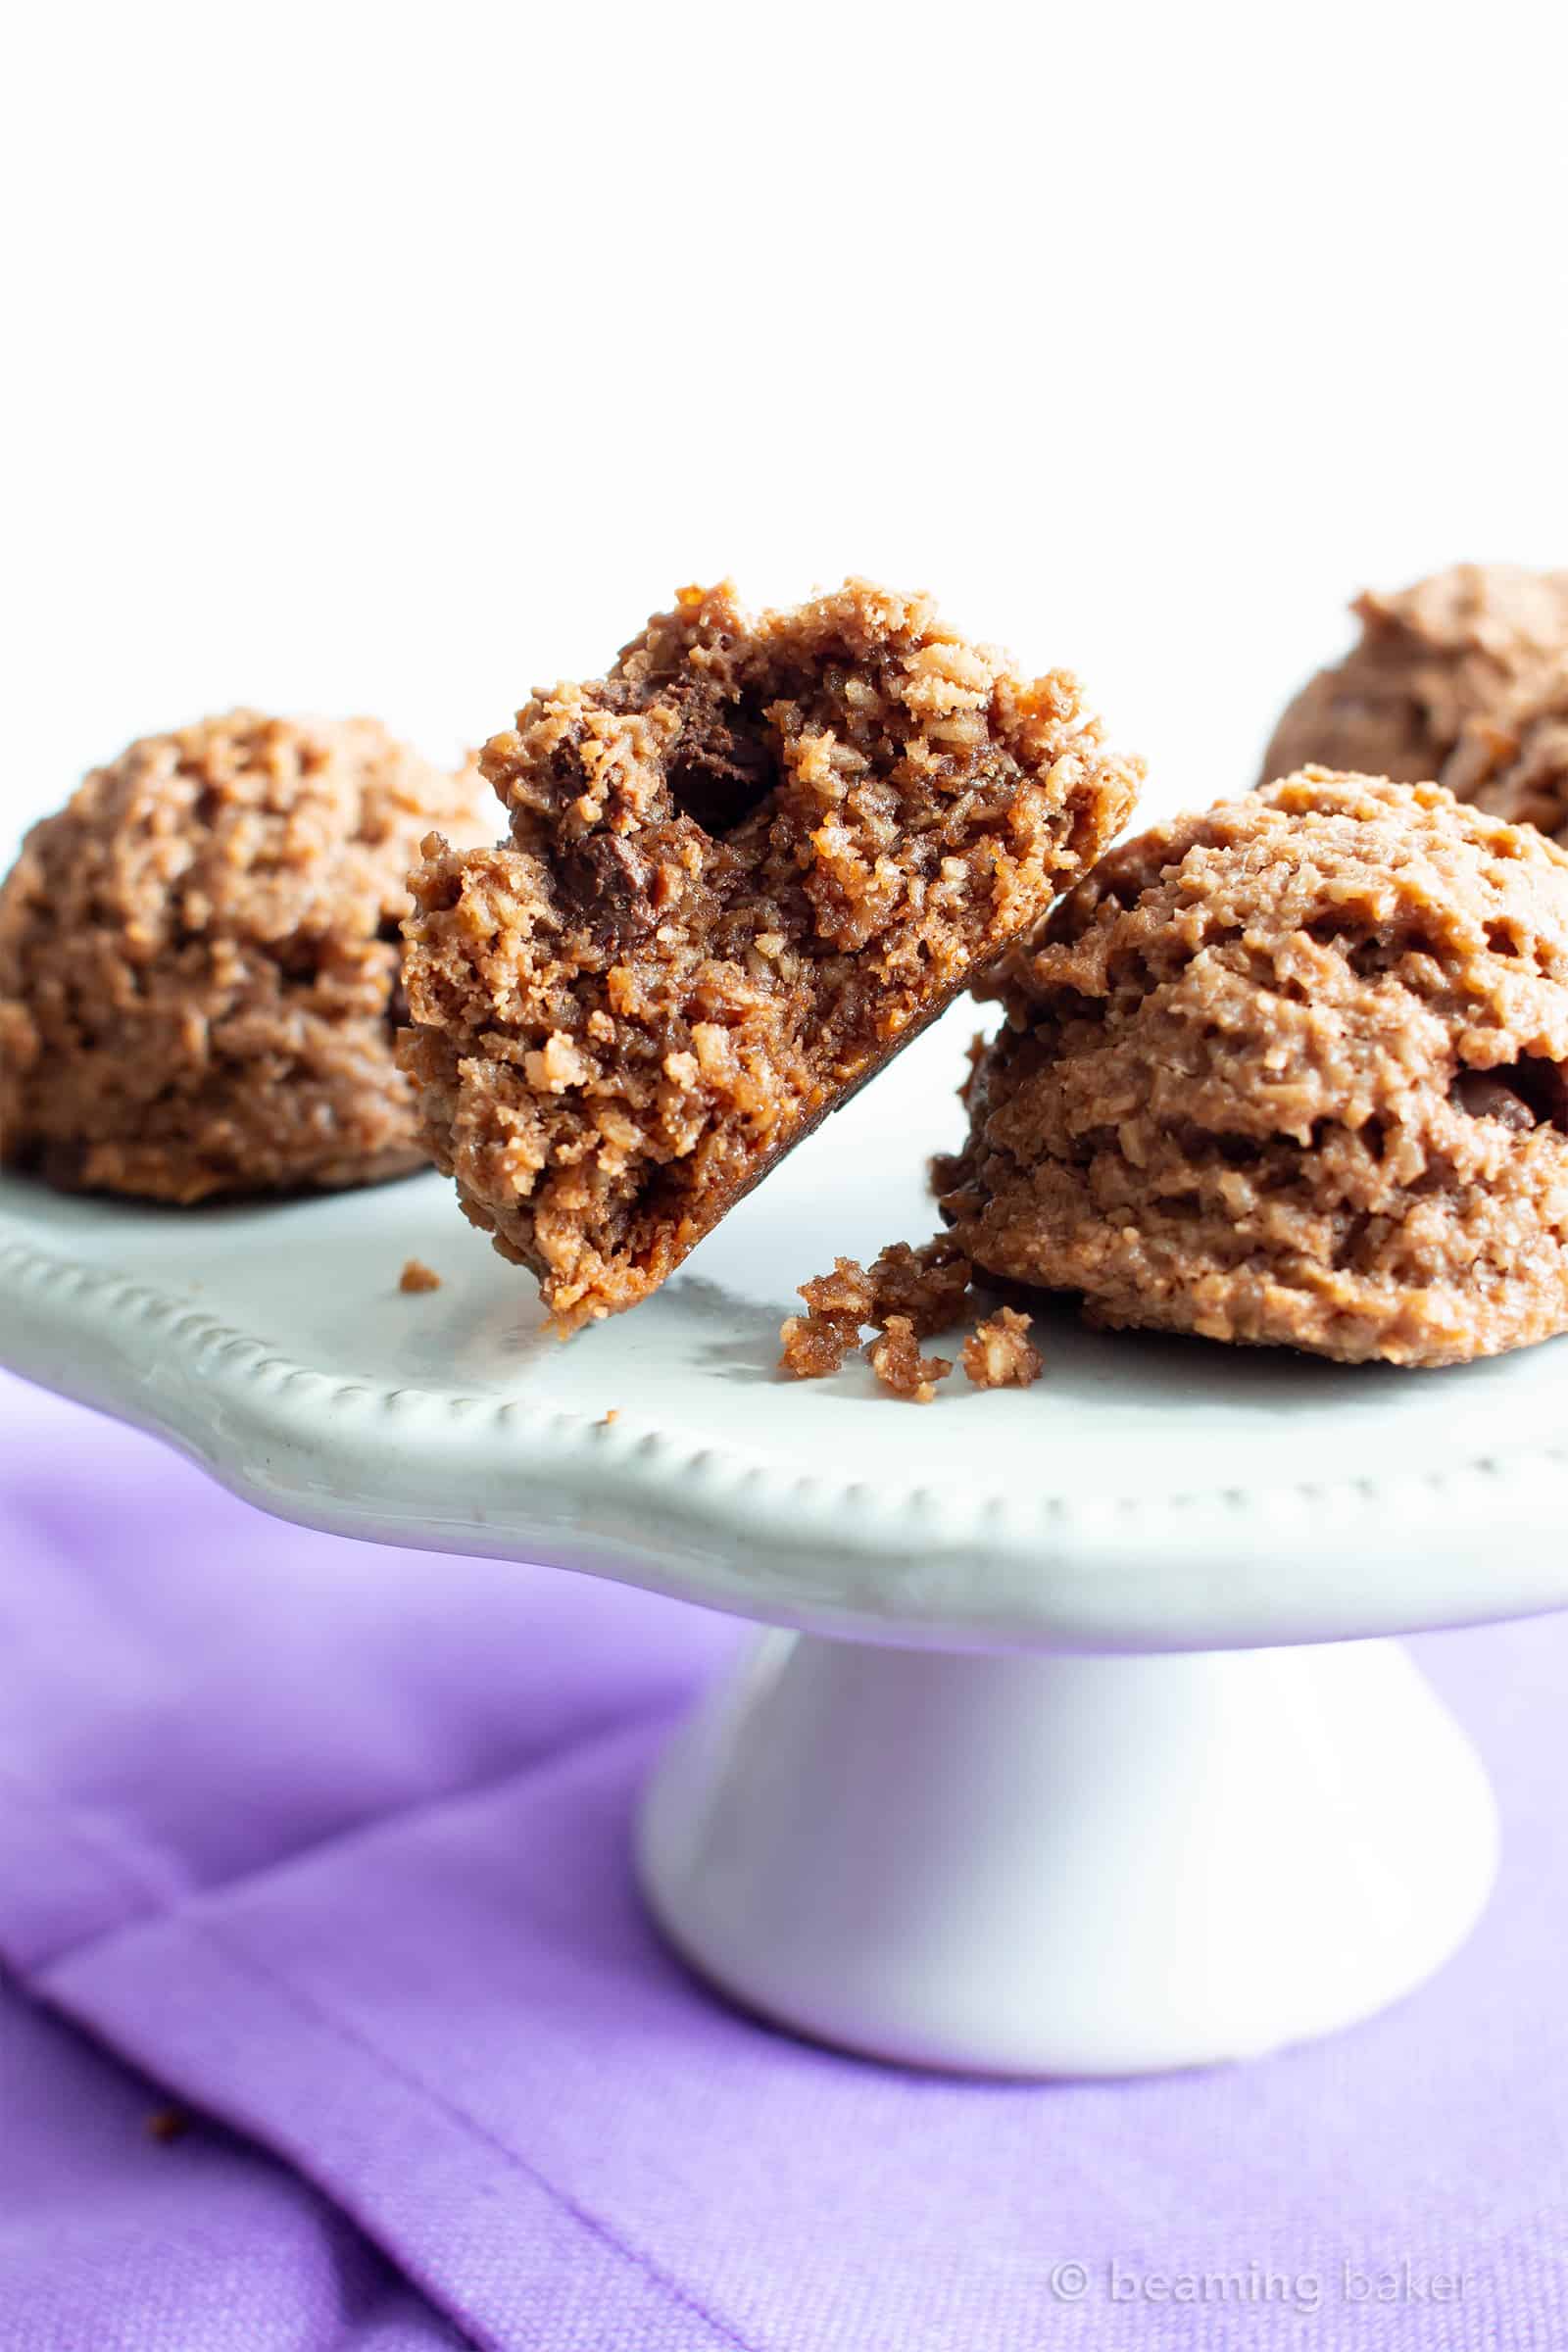 Paleo Chocolate Coconut Macaroons Recipe (V, GF): an easy recipe for deliciously chewy chocolate macaroon cookies bursting with 2x the amount of chocolate! Made with healthy, whole ingredients. #Paleo #Vegan #GlutenFree #Coconut #Macaroons #PaleoDesserts #CleanEating | Recipe at BeamingBaker.com